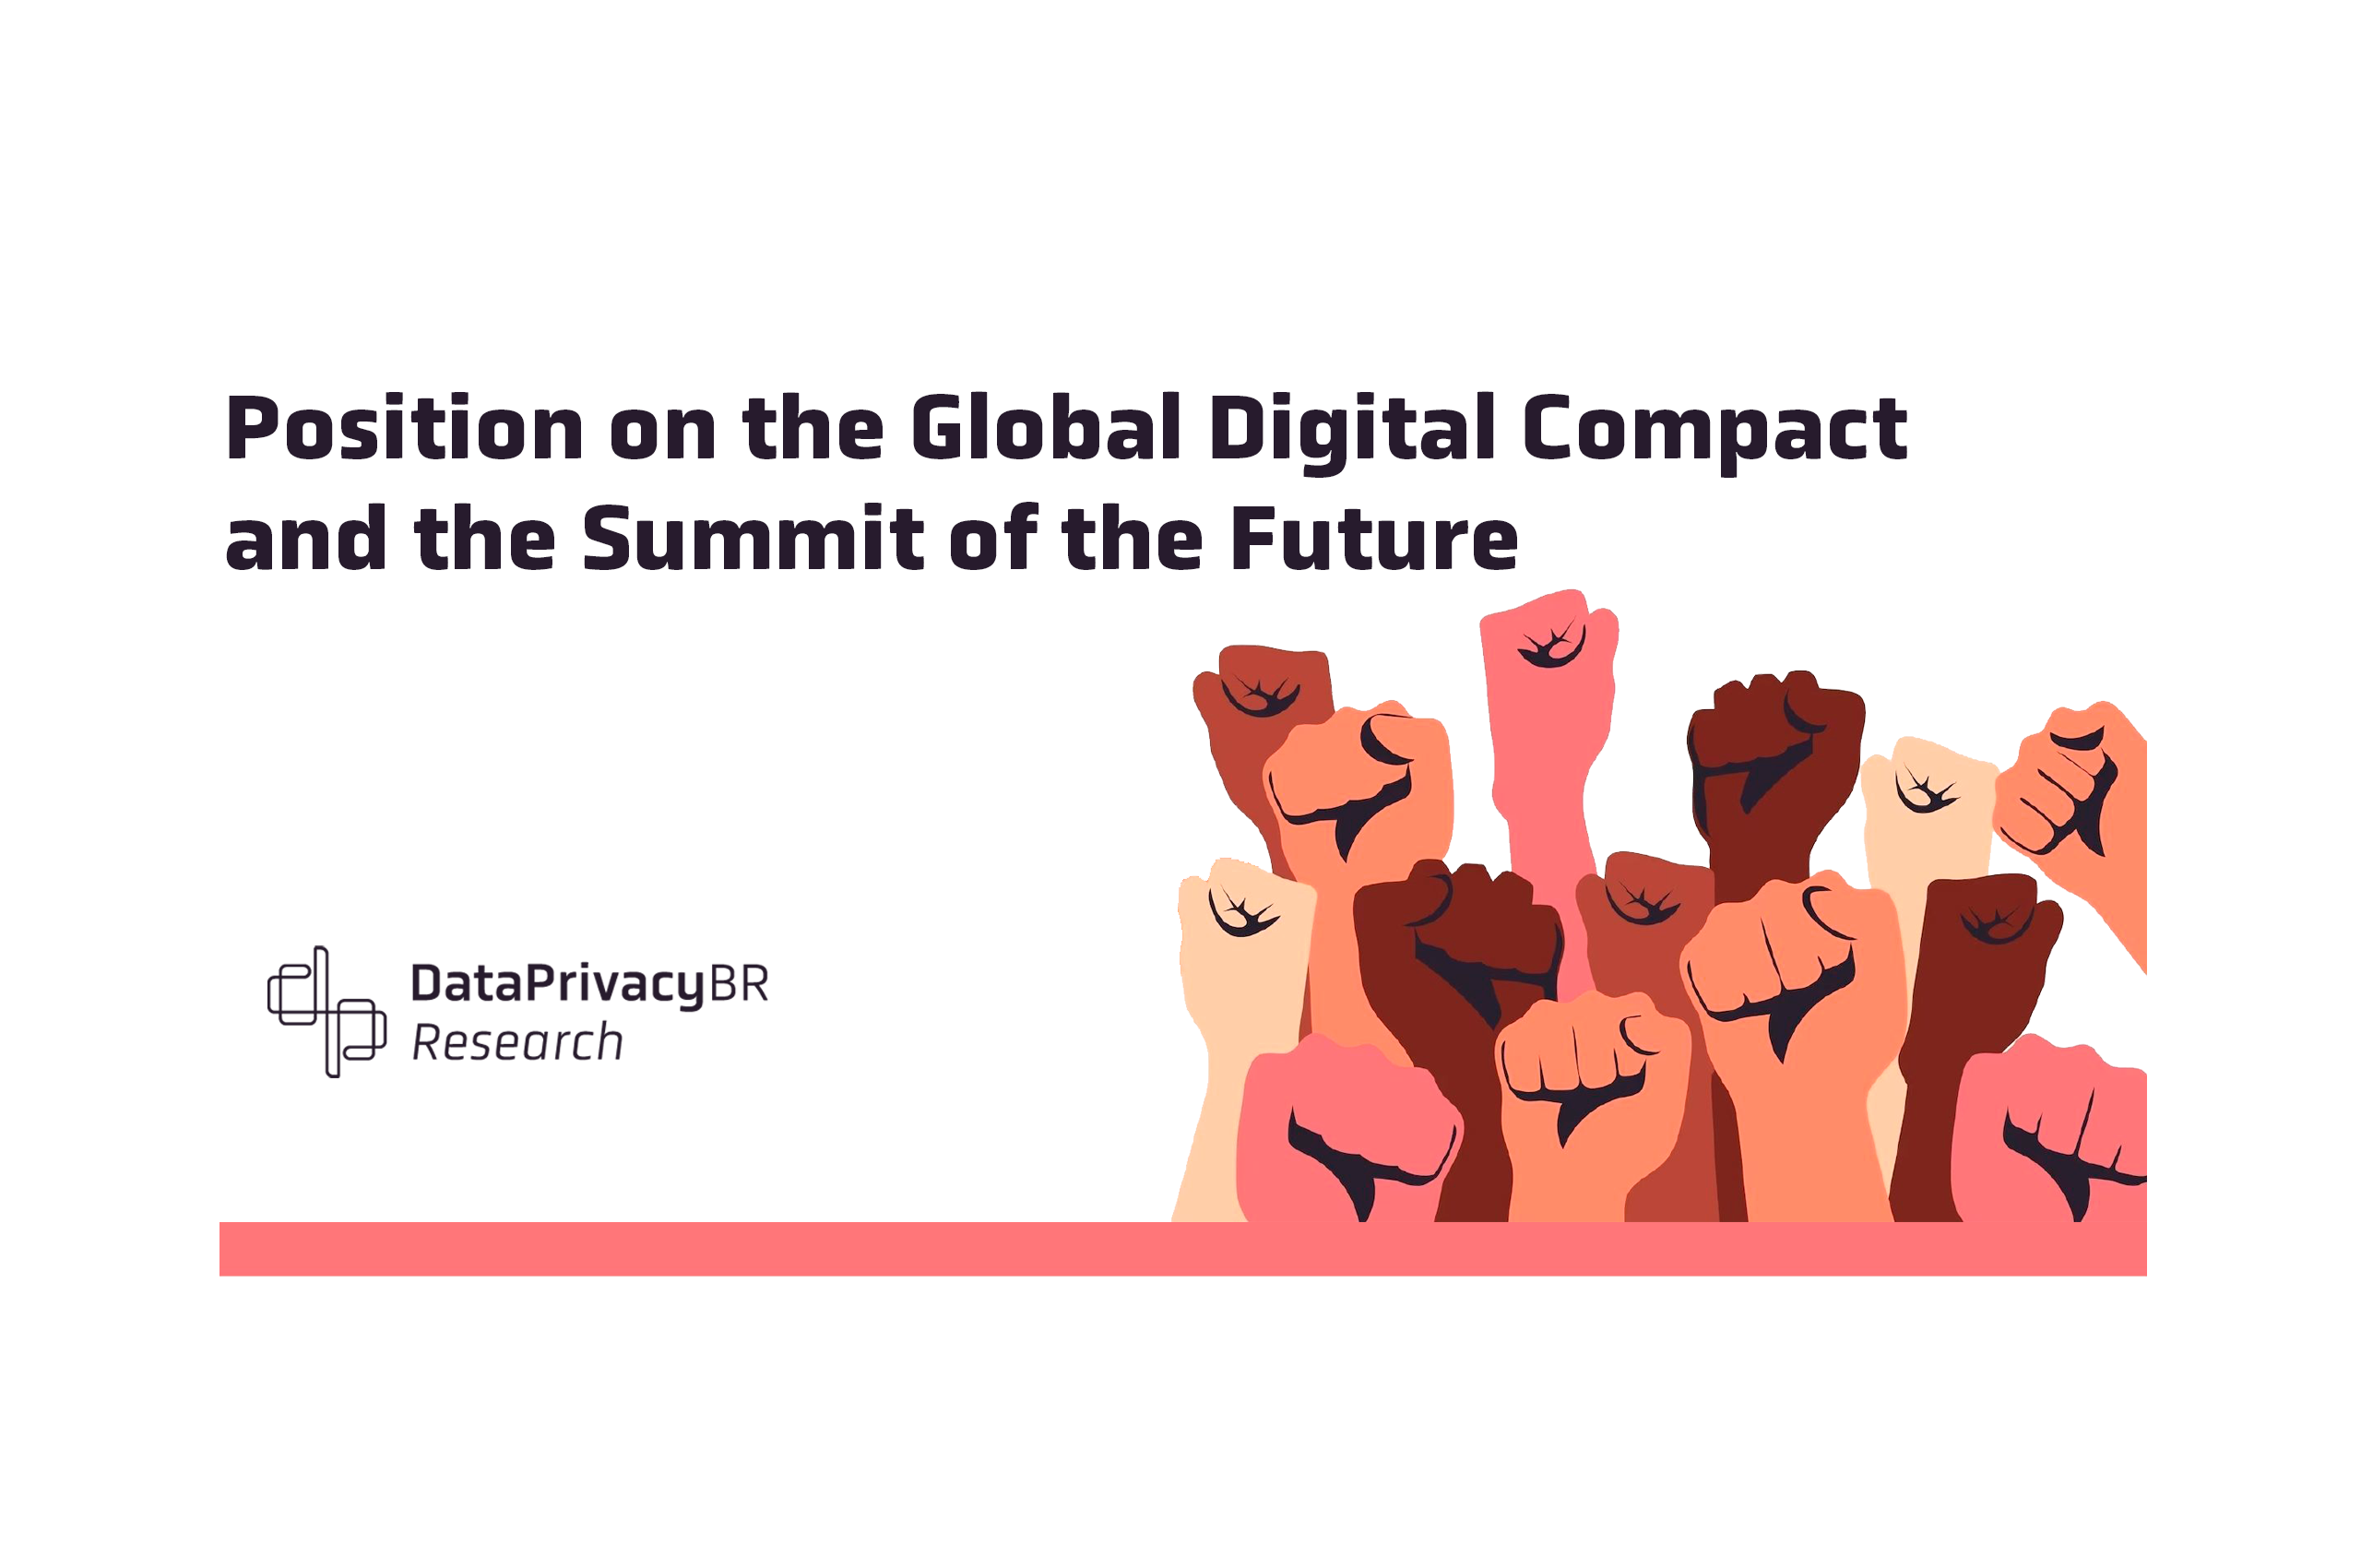 http://Position%20on%20the%20Global%20Digital%20Compact%20and%20the%20Summit%20of%20the%20Future